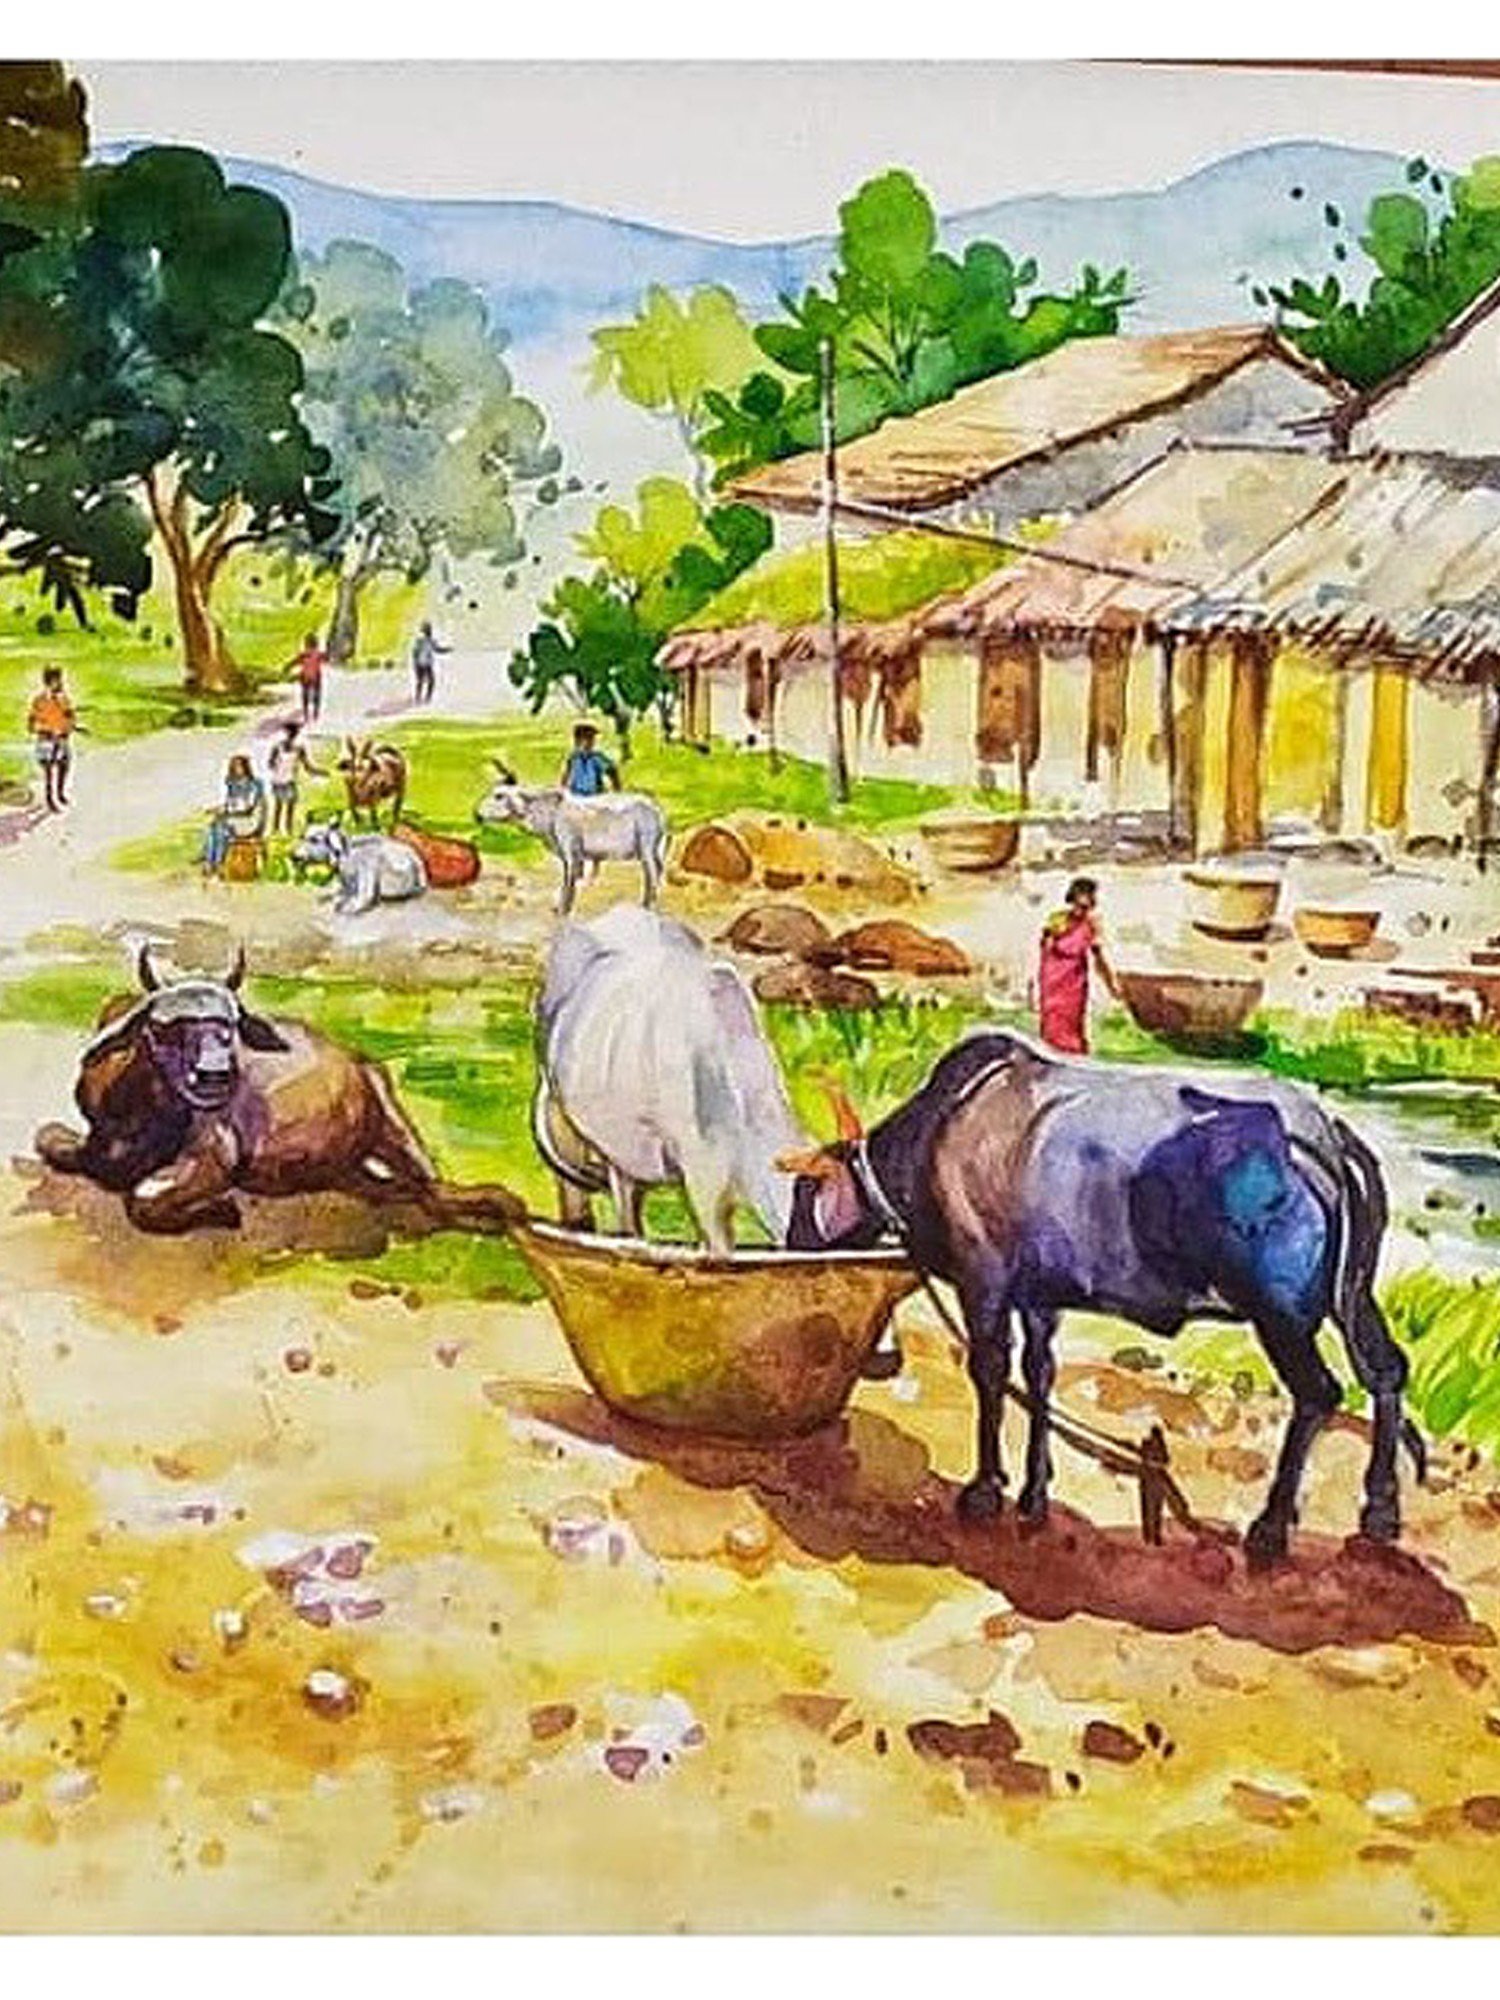 The Beauty of Rural Life